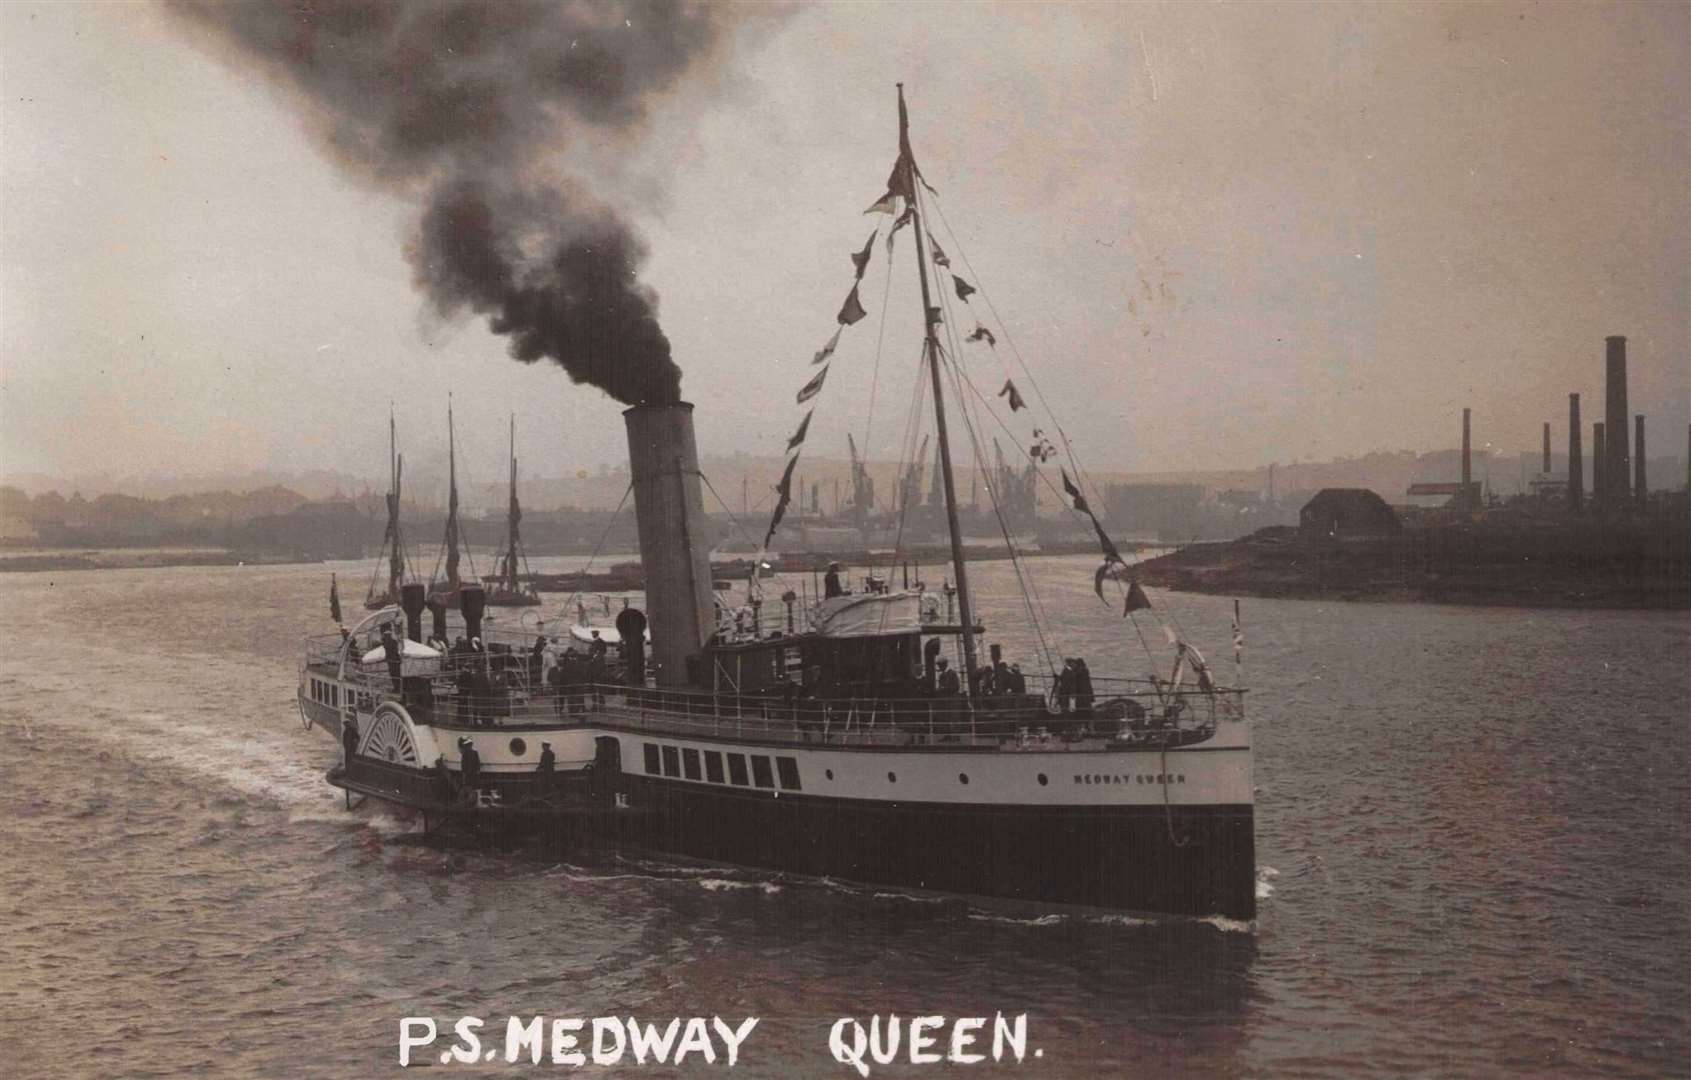 The Medway Queen in her working days